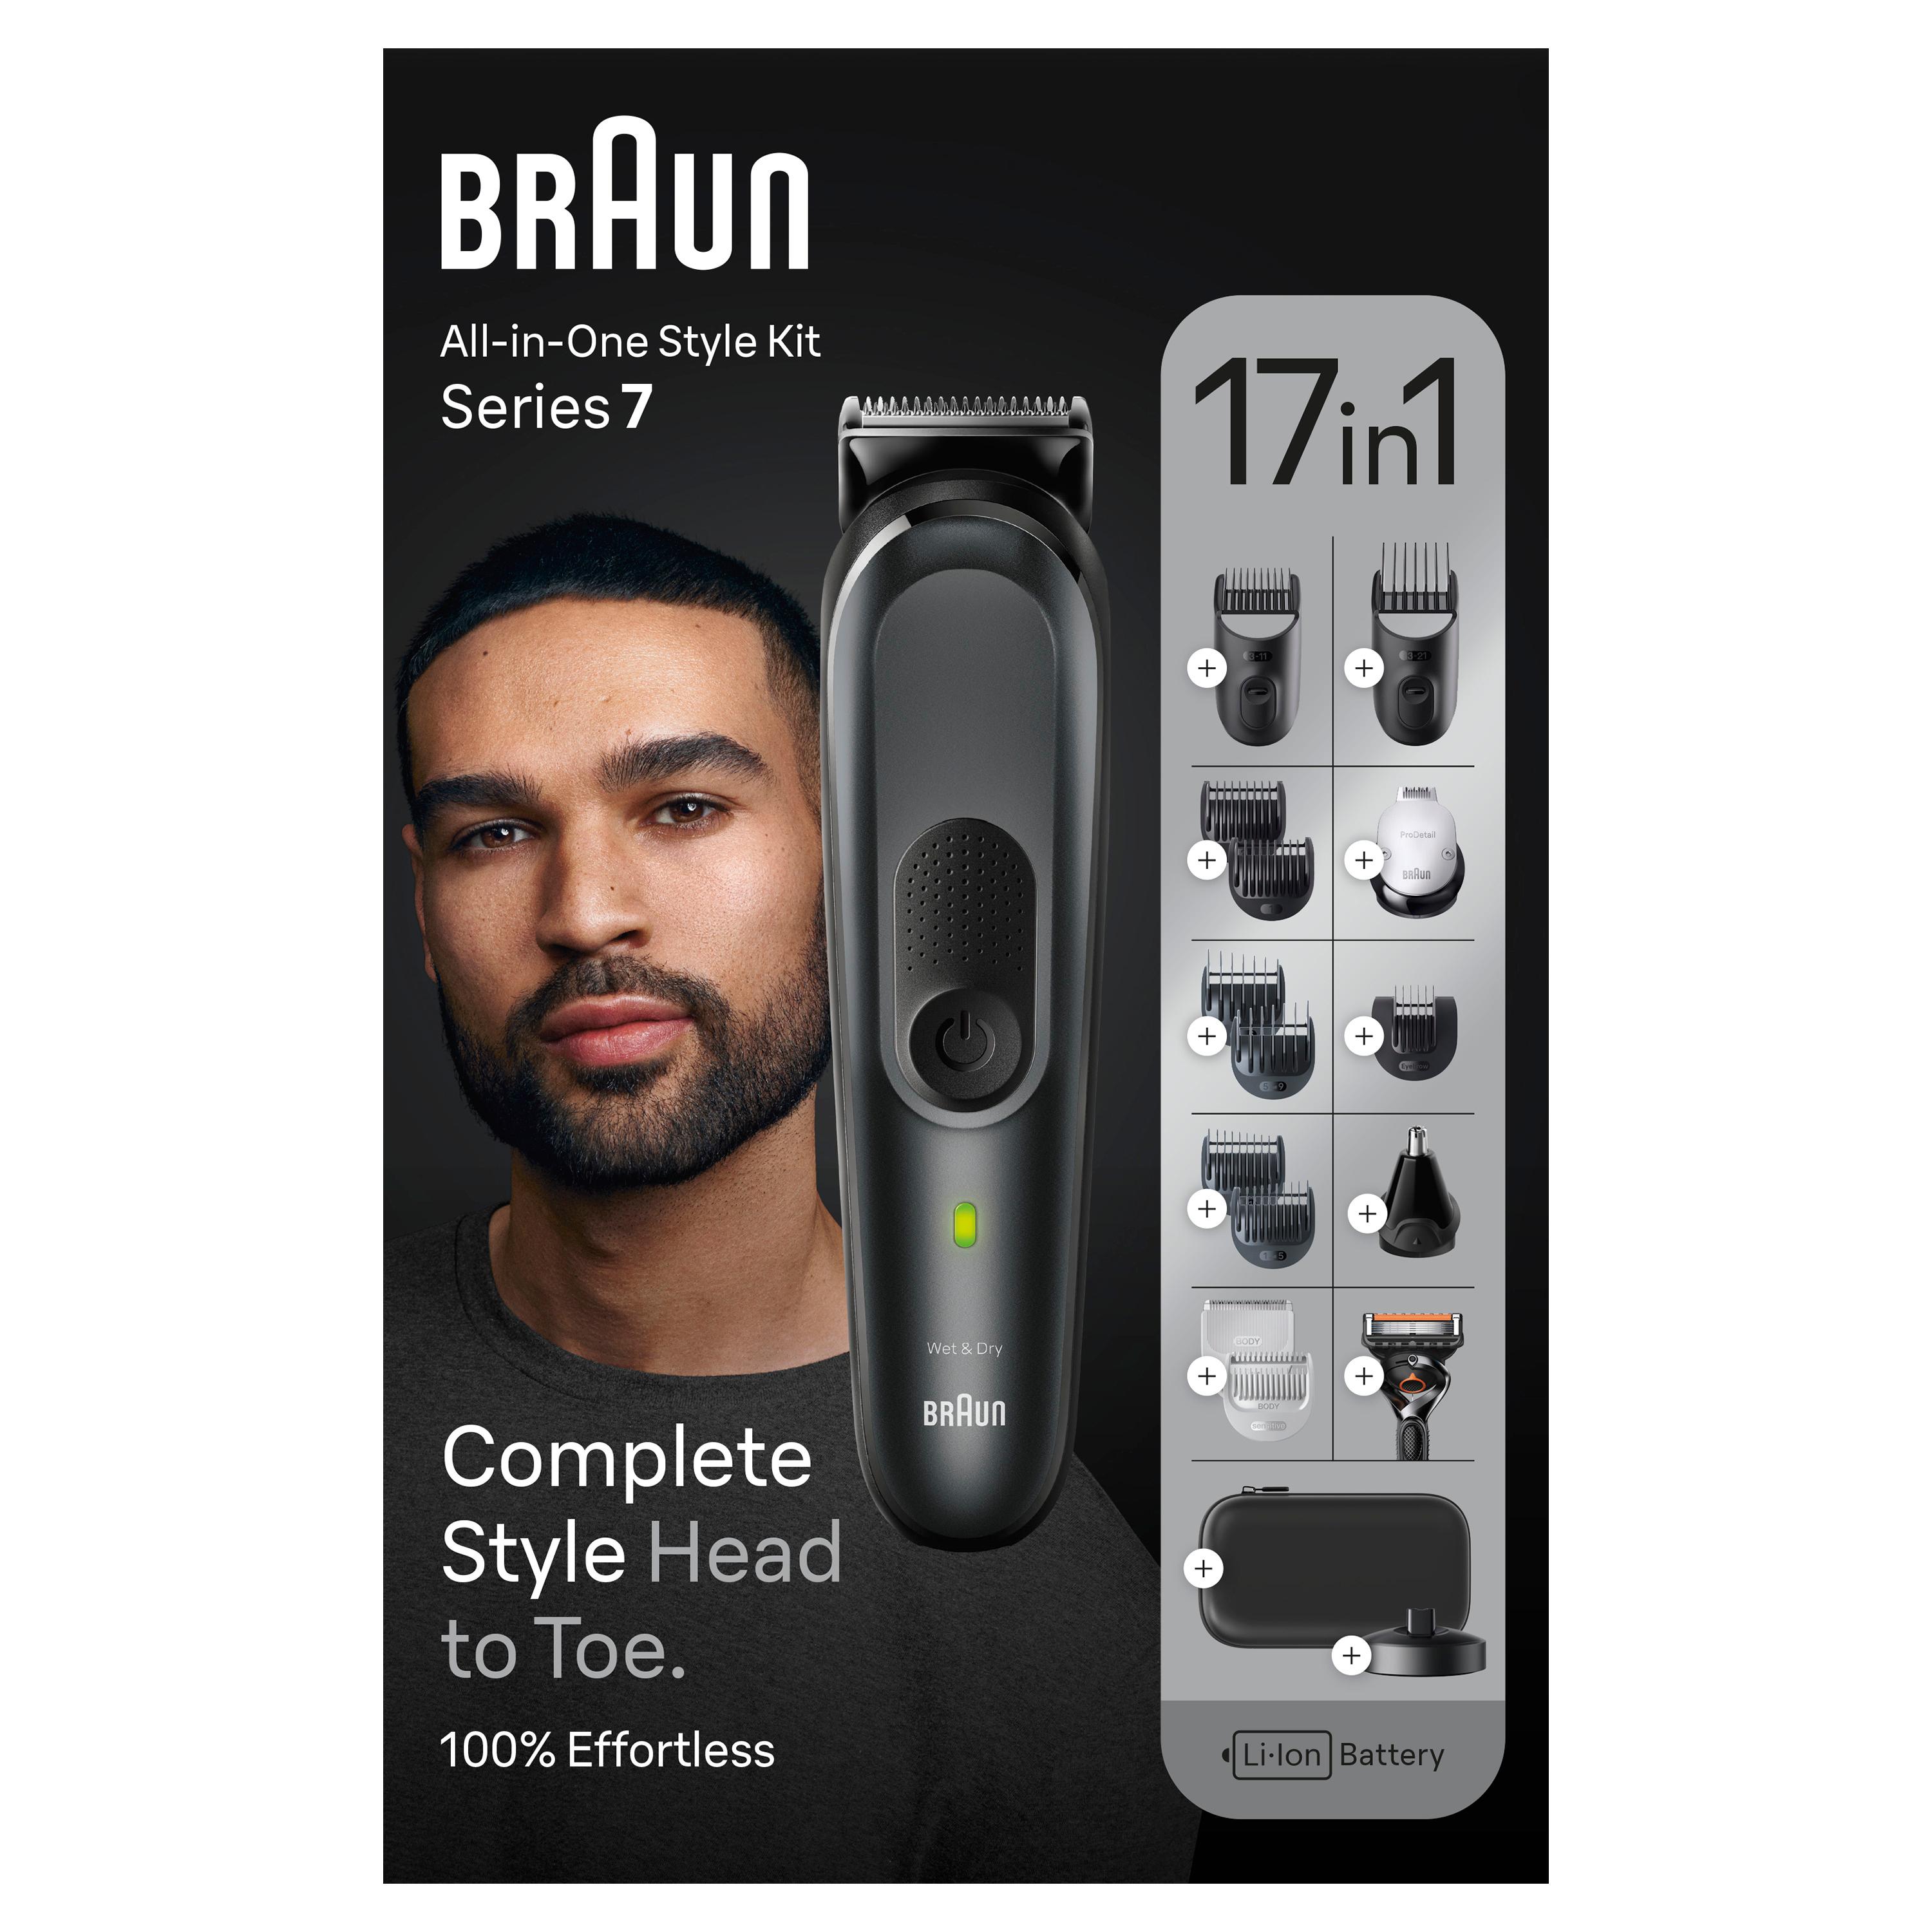 BRAUN - All-in-One Style Kit MGK7491